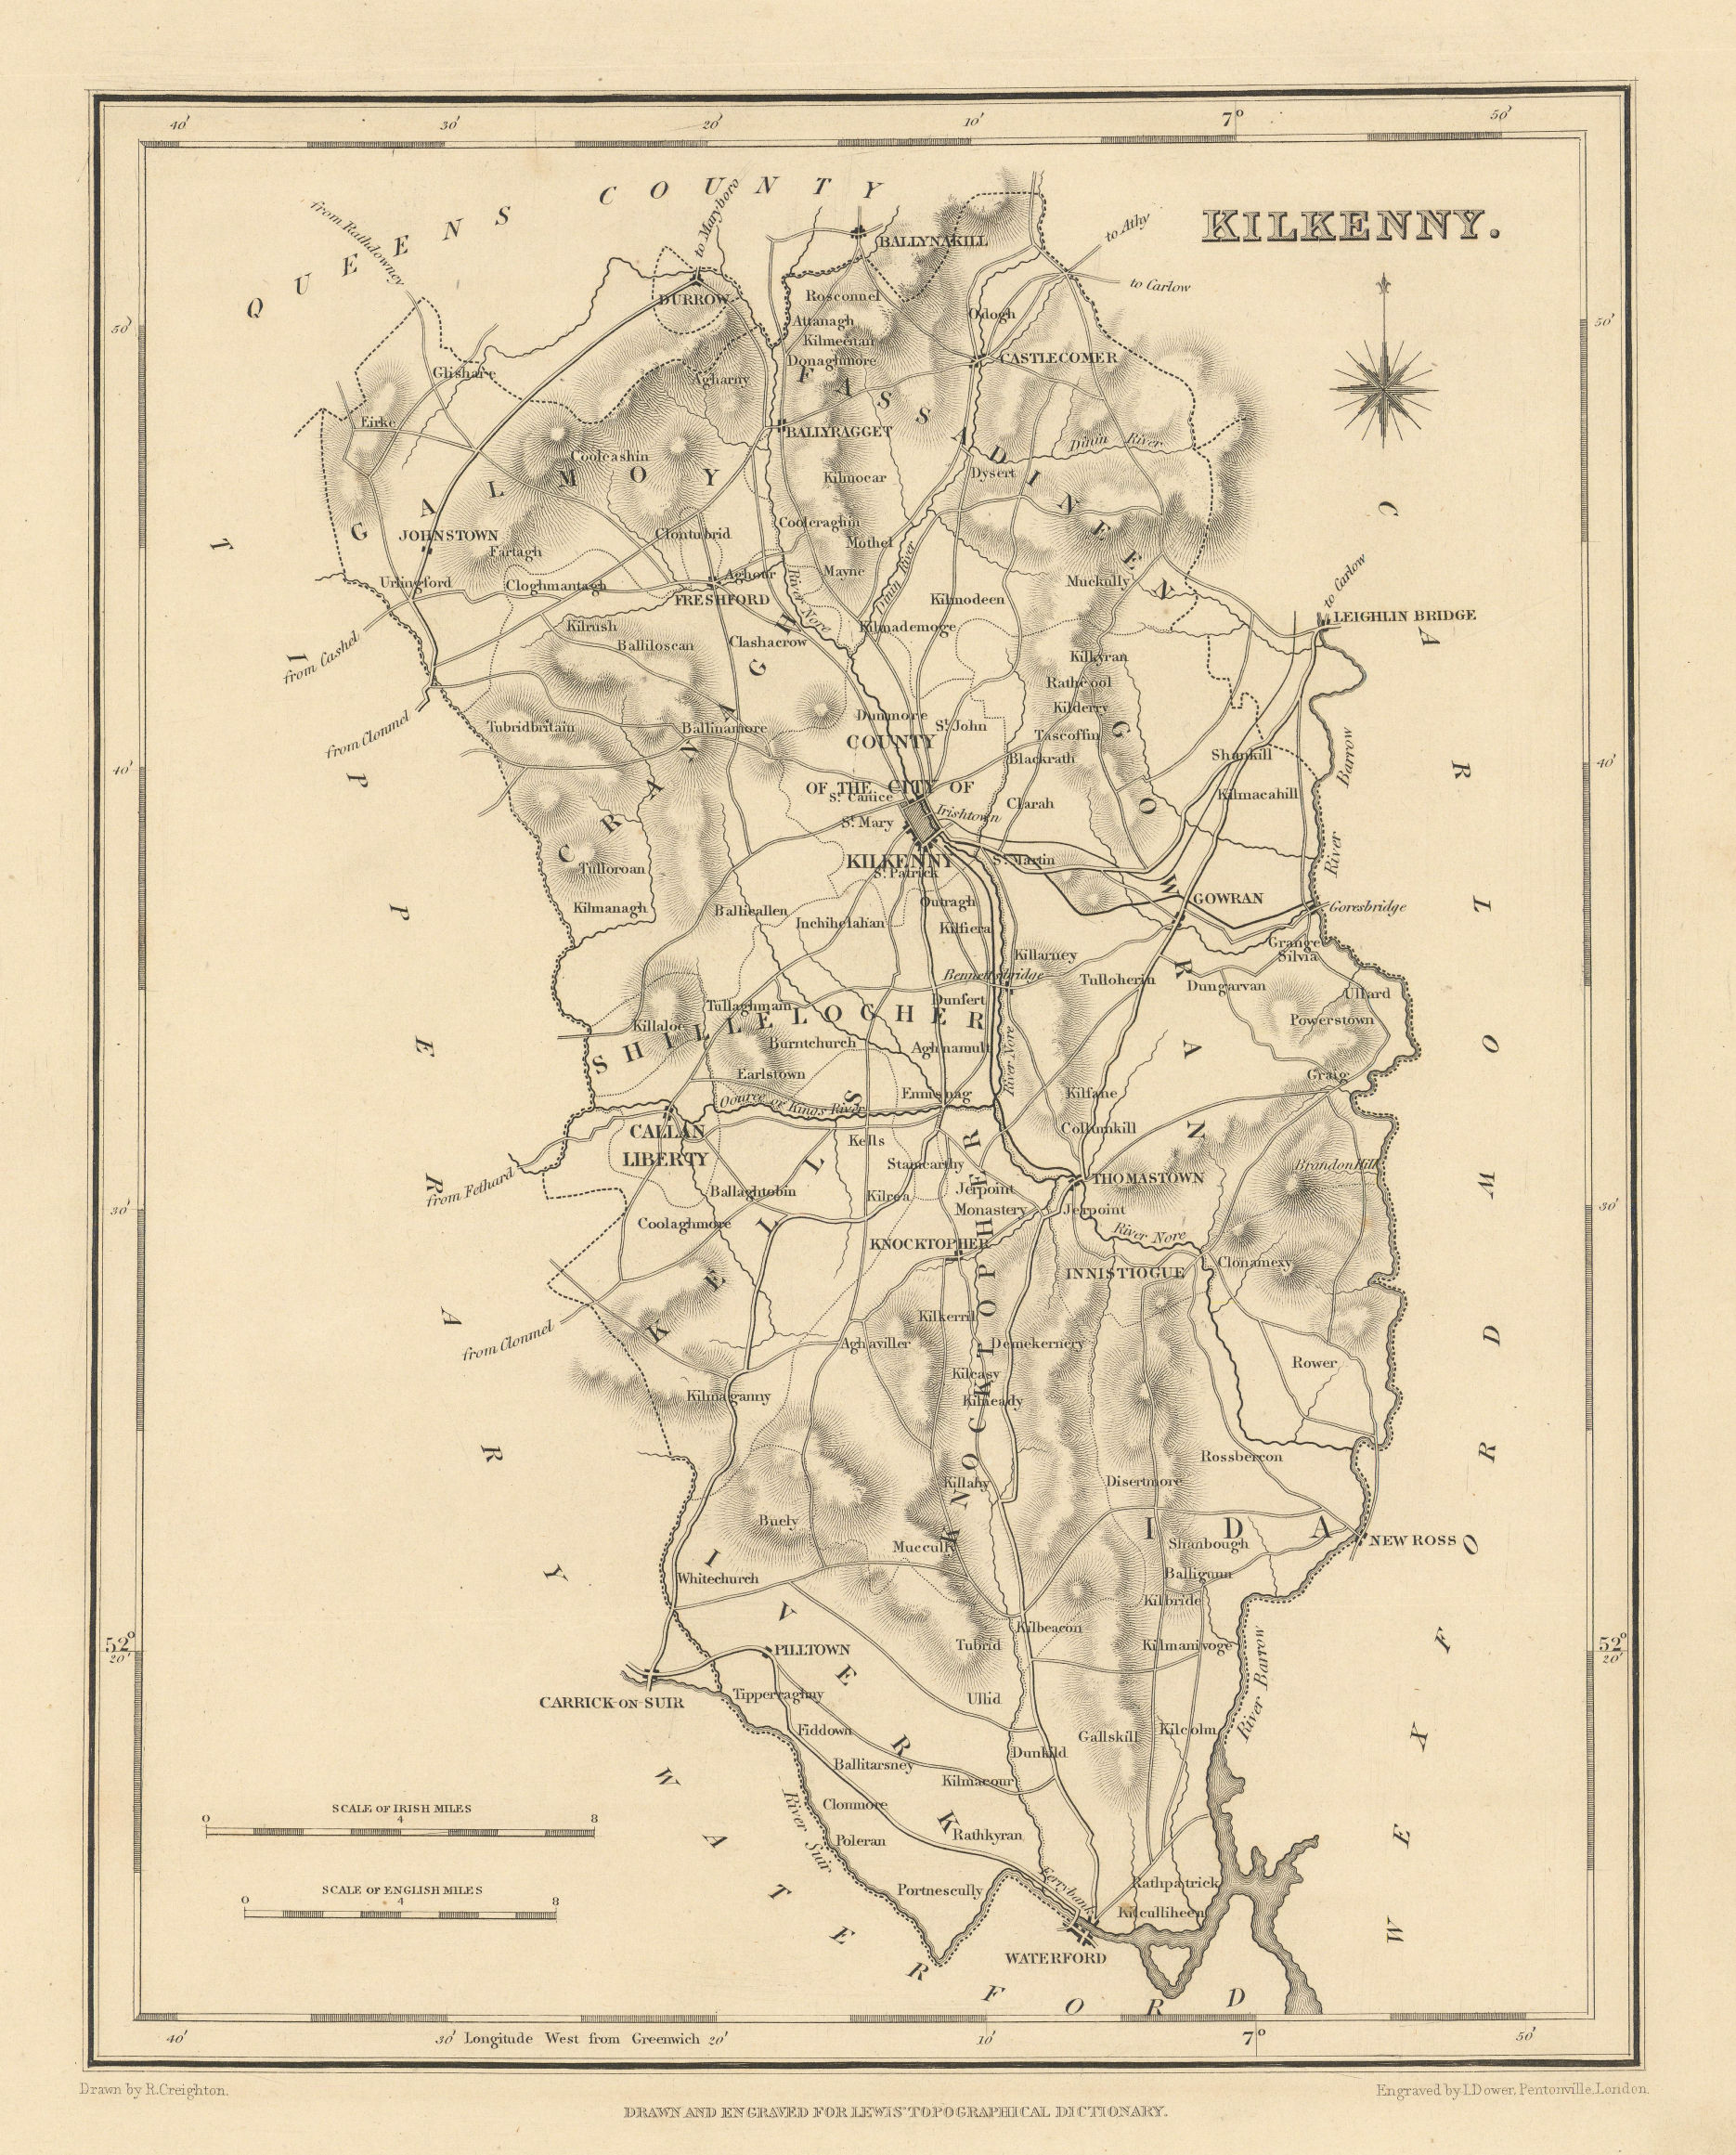 COUNTY KILKENNY antique map for LEWIS by CREIGHTON & DOWER - Ireland 1837